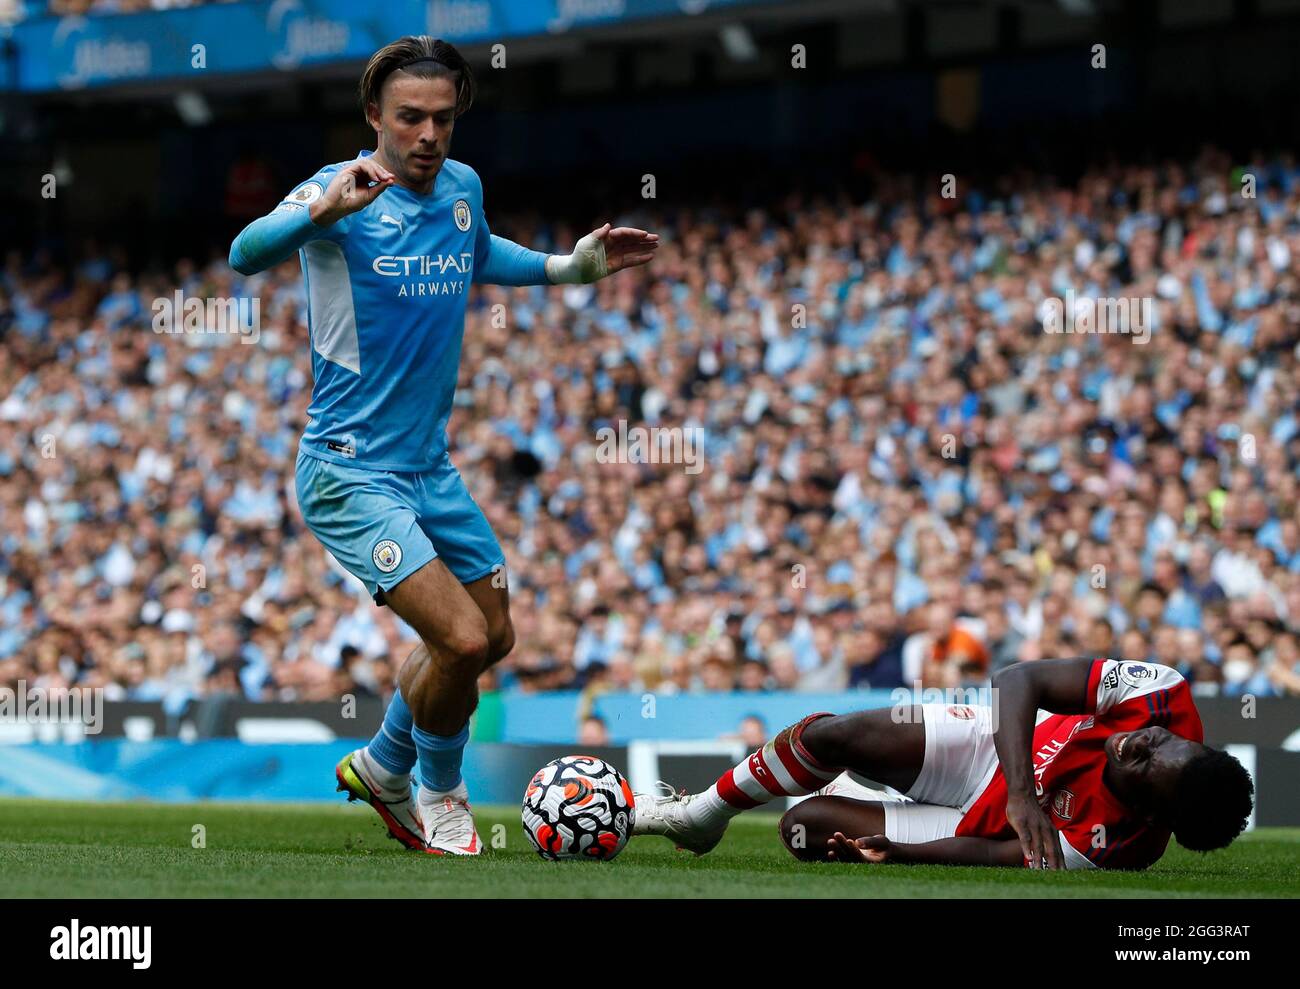 Manchester, England, 28th August 2021.  Jack Grealish of Manchester City challenges Bukayo Saka of Arsenal during the Premier League match at the Etihad Stadium, Manchester. Picture credit should read: Darren Staples / Sportimage Stock Photo